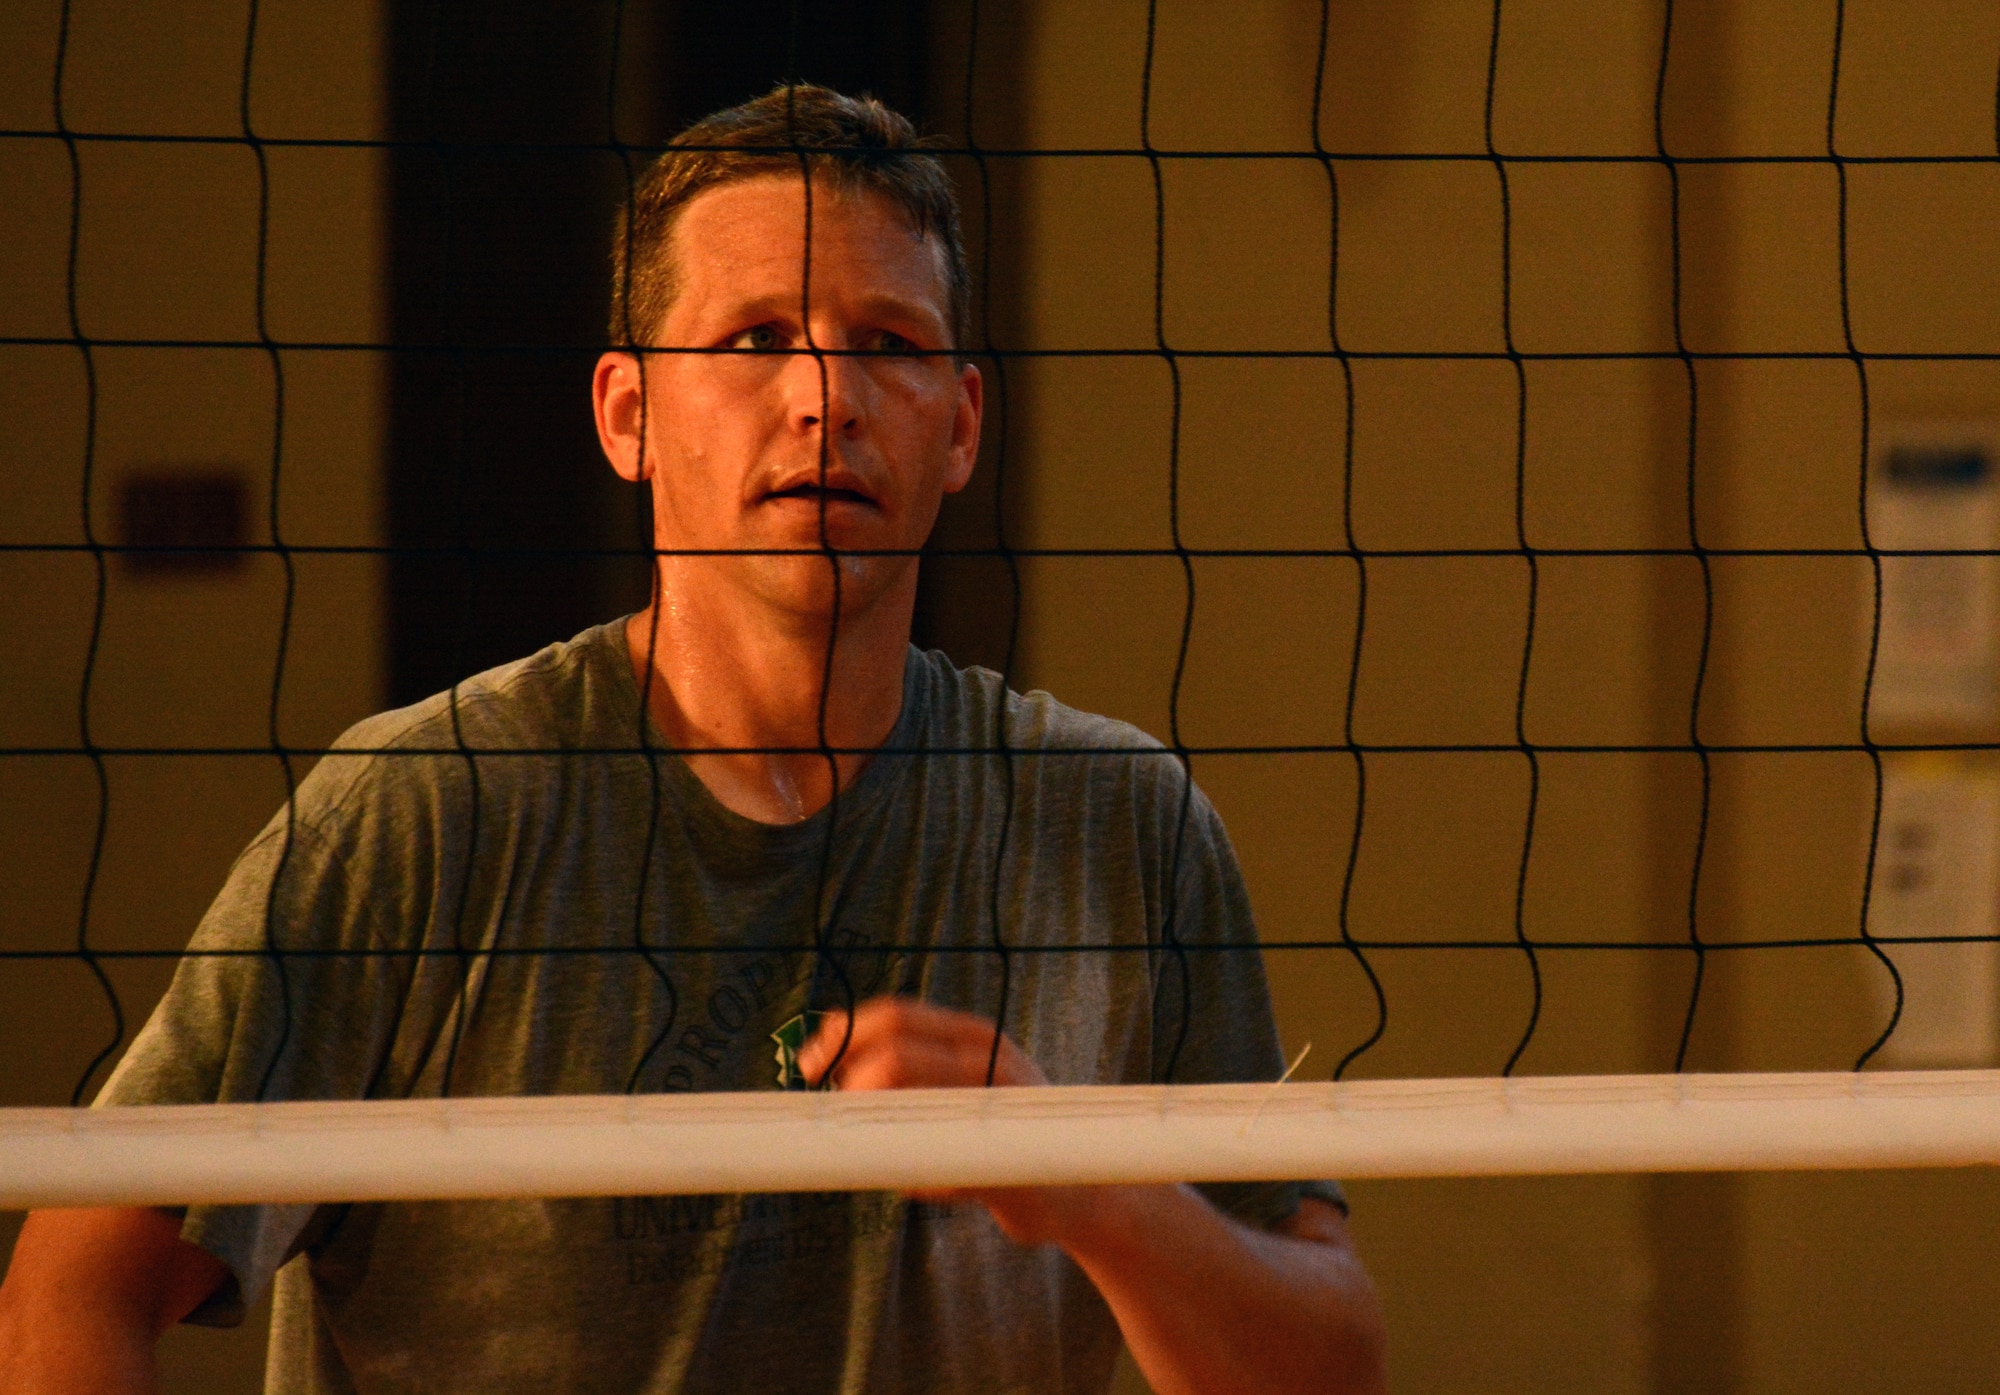 Maj John Wagemann, a student at Air Command and Staff College guards the net during a volley at the 2014 Maxwell-Gunter Air Force Base intramural Volleyball championship, May 6, 2014. The match was played between a team of ACSC students and a team from the Squadron Officer College here. (U.S. Air Force Photo by Staff Sgt. Gregory Brook)